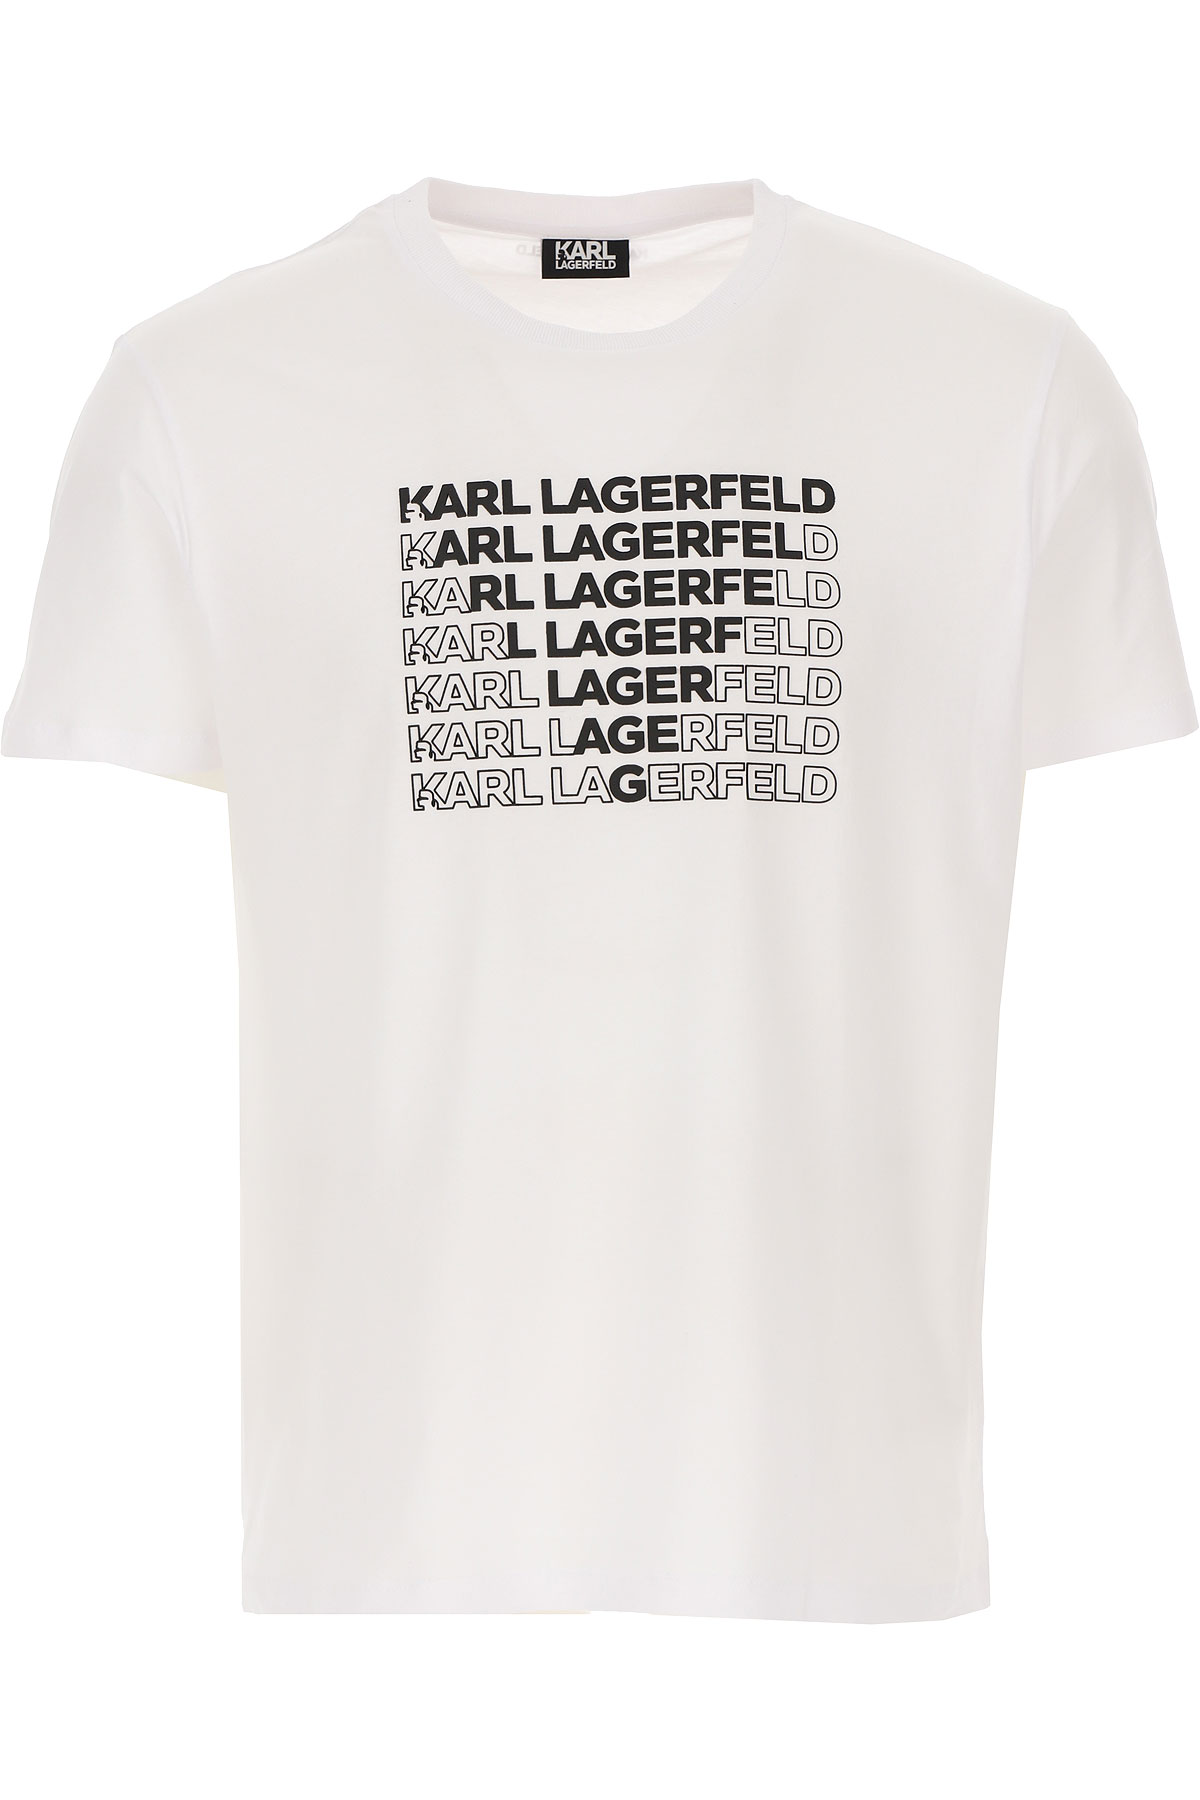 Mens Clothing Karl Lagerfeld, Style code: 755045-501220-10